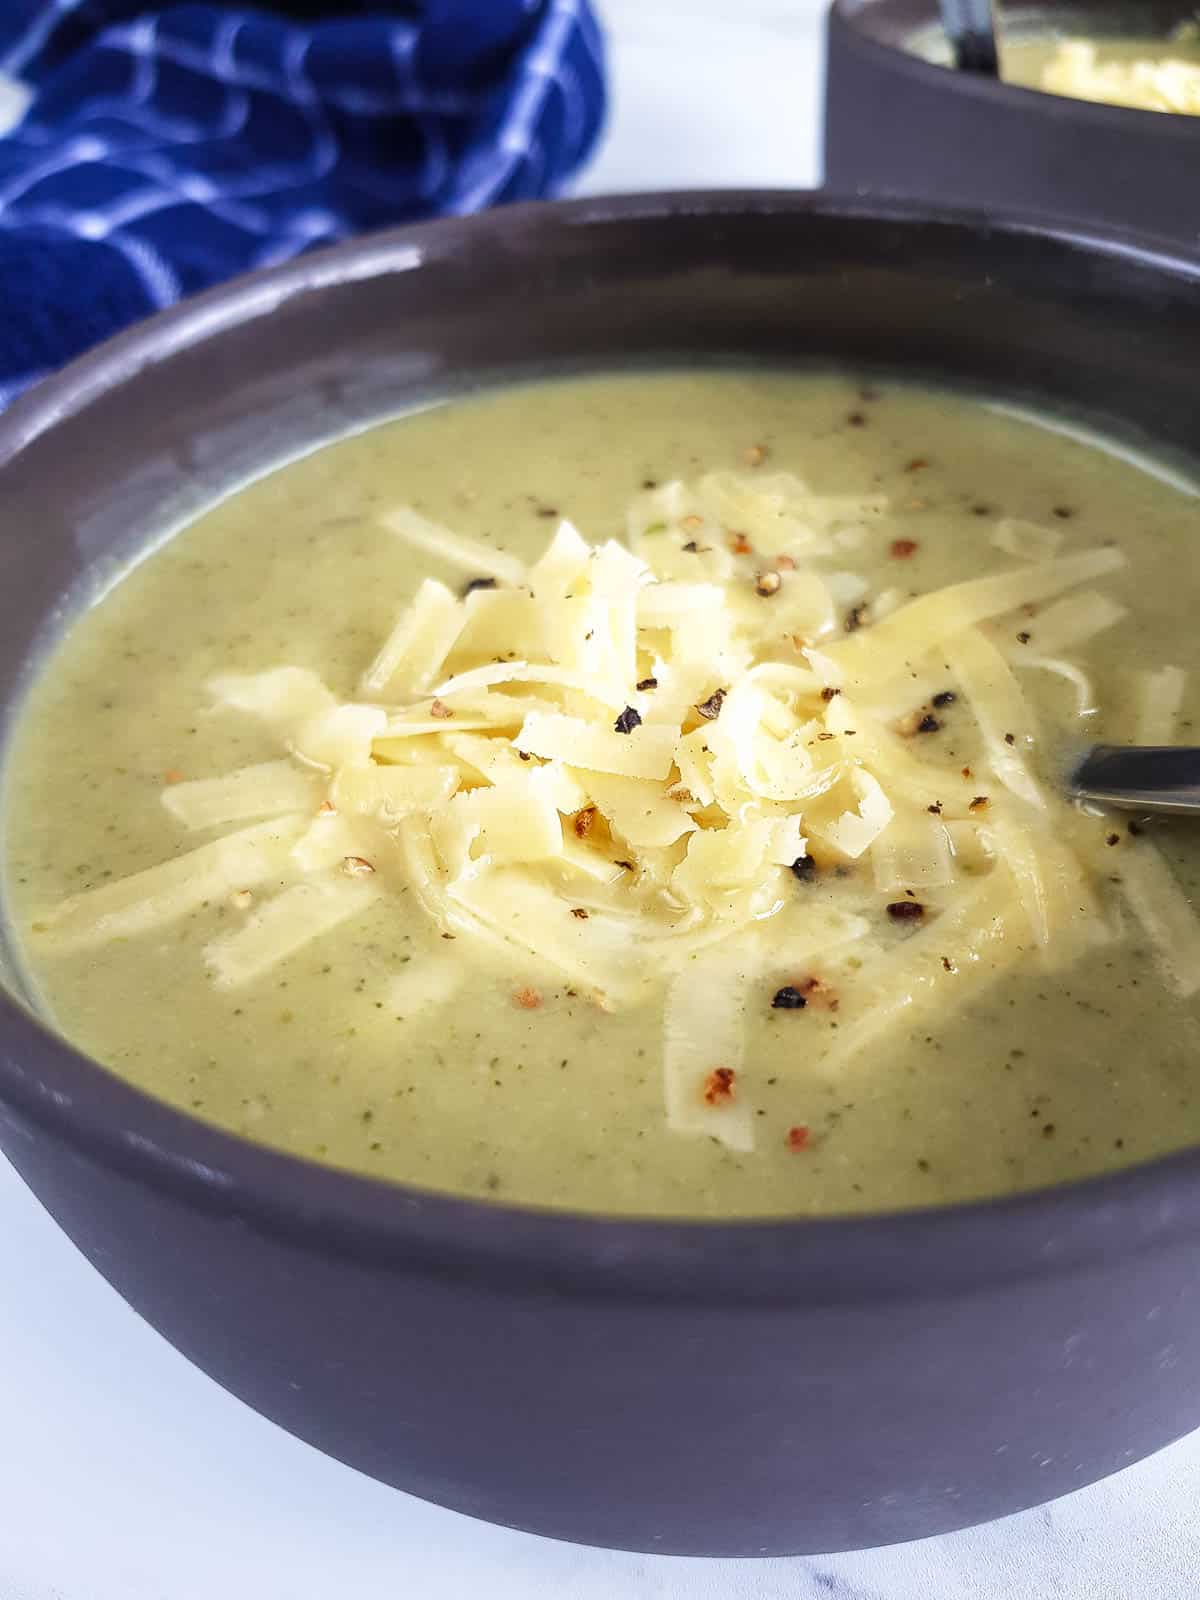 A close up of a bowl of soup.